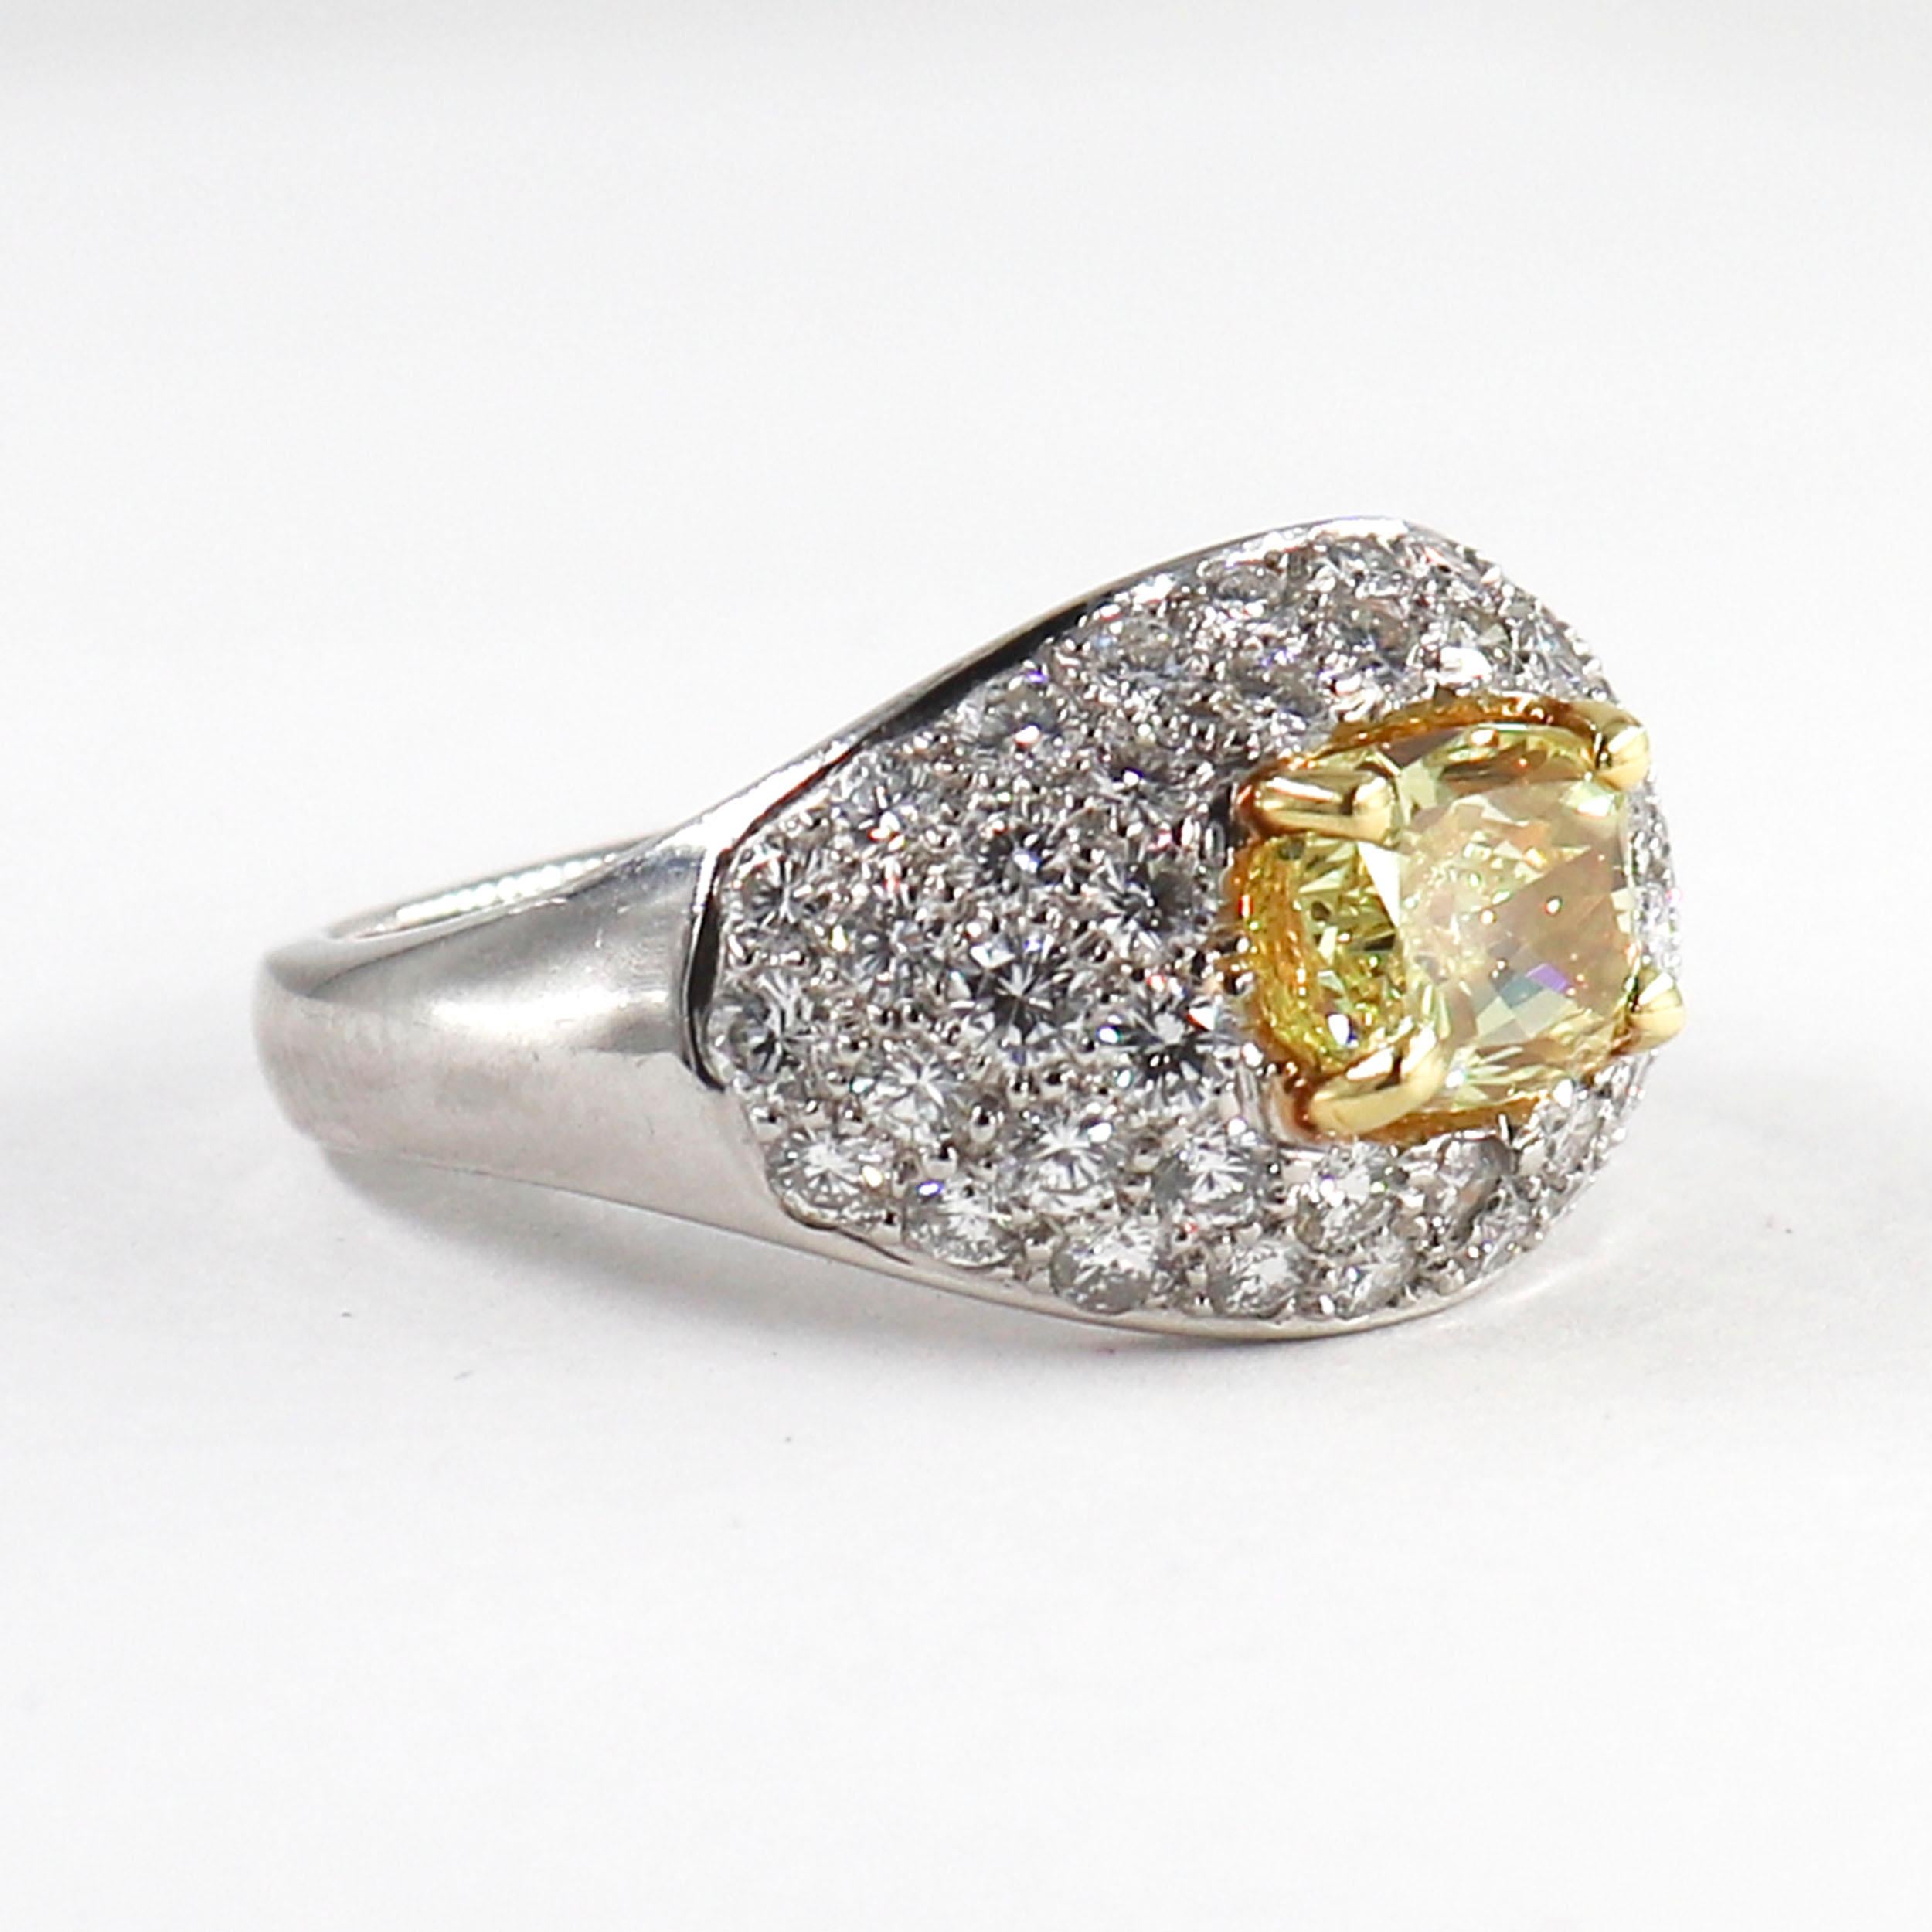 The ultimate statement piece! This bright and bold ring is perfect for anyone who loves color and sparkle. The ring features a 1.53 carat cushion yellow diamond, graded by GIA to have a fancy intense color grade. This rich, saturated color is a